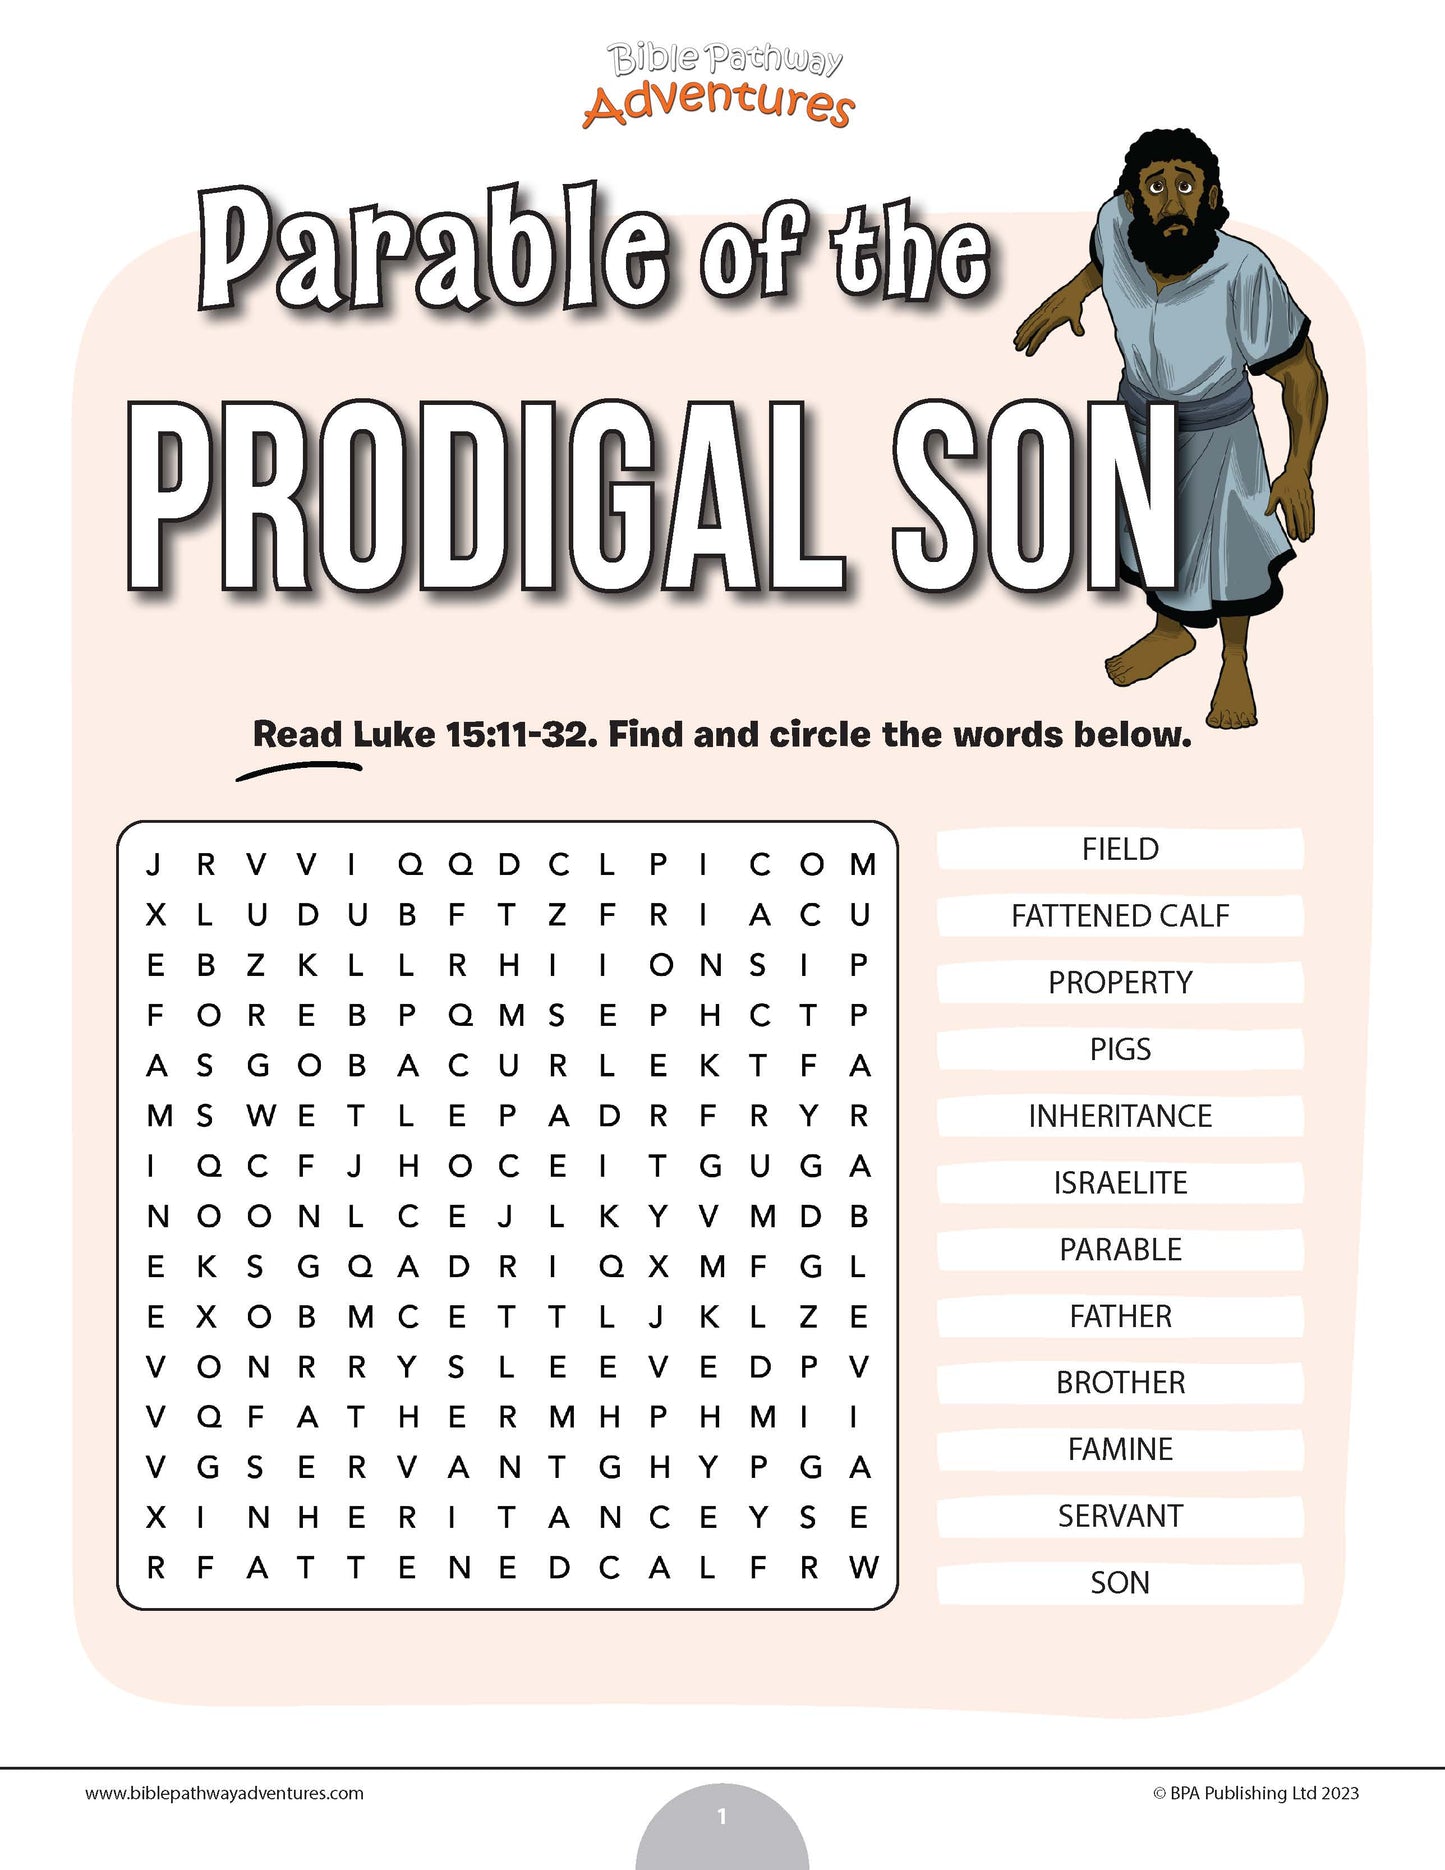 Parable of the Prodigal Son word search (PDF)